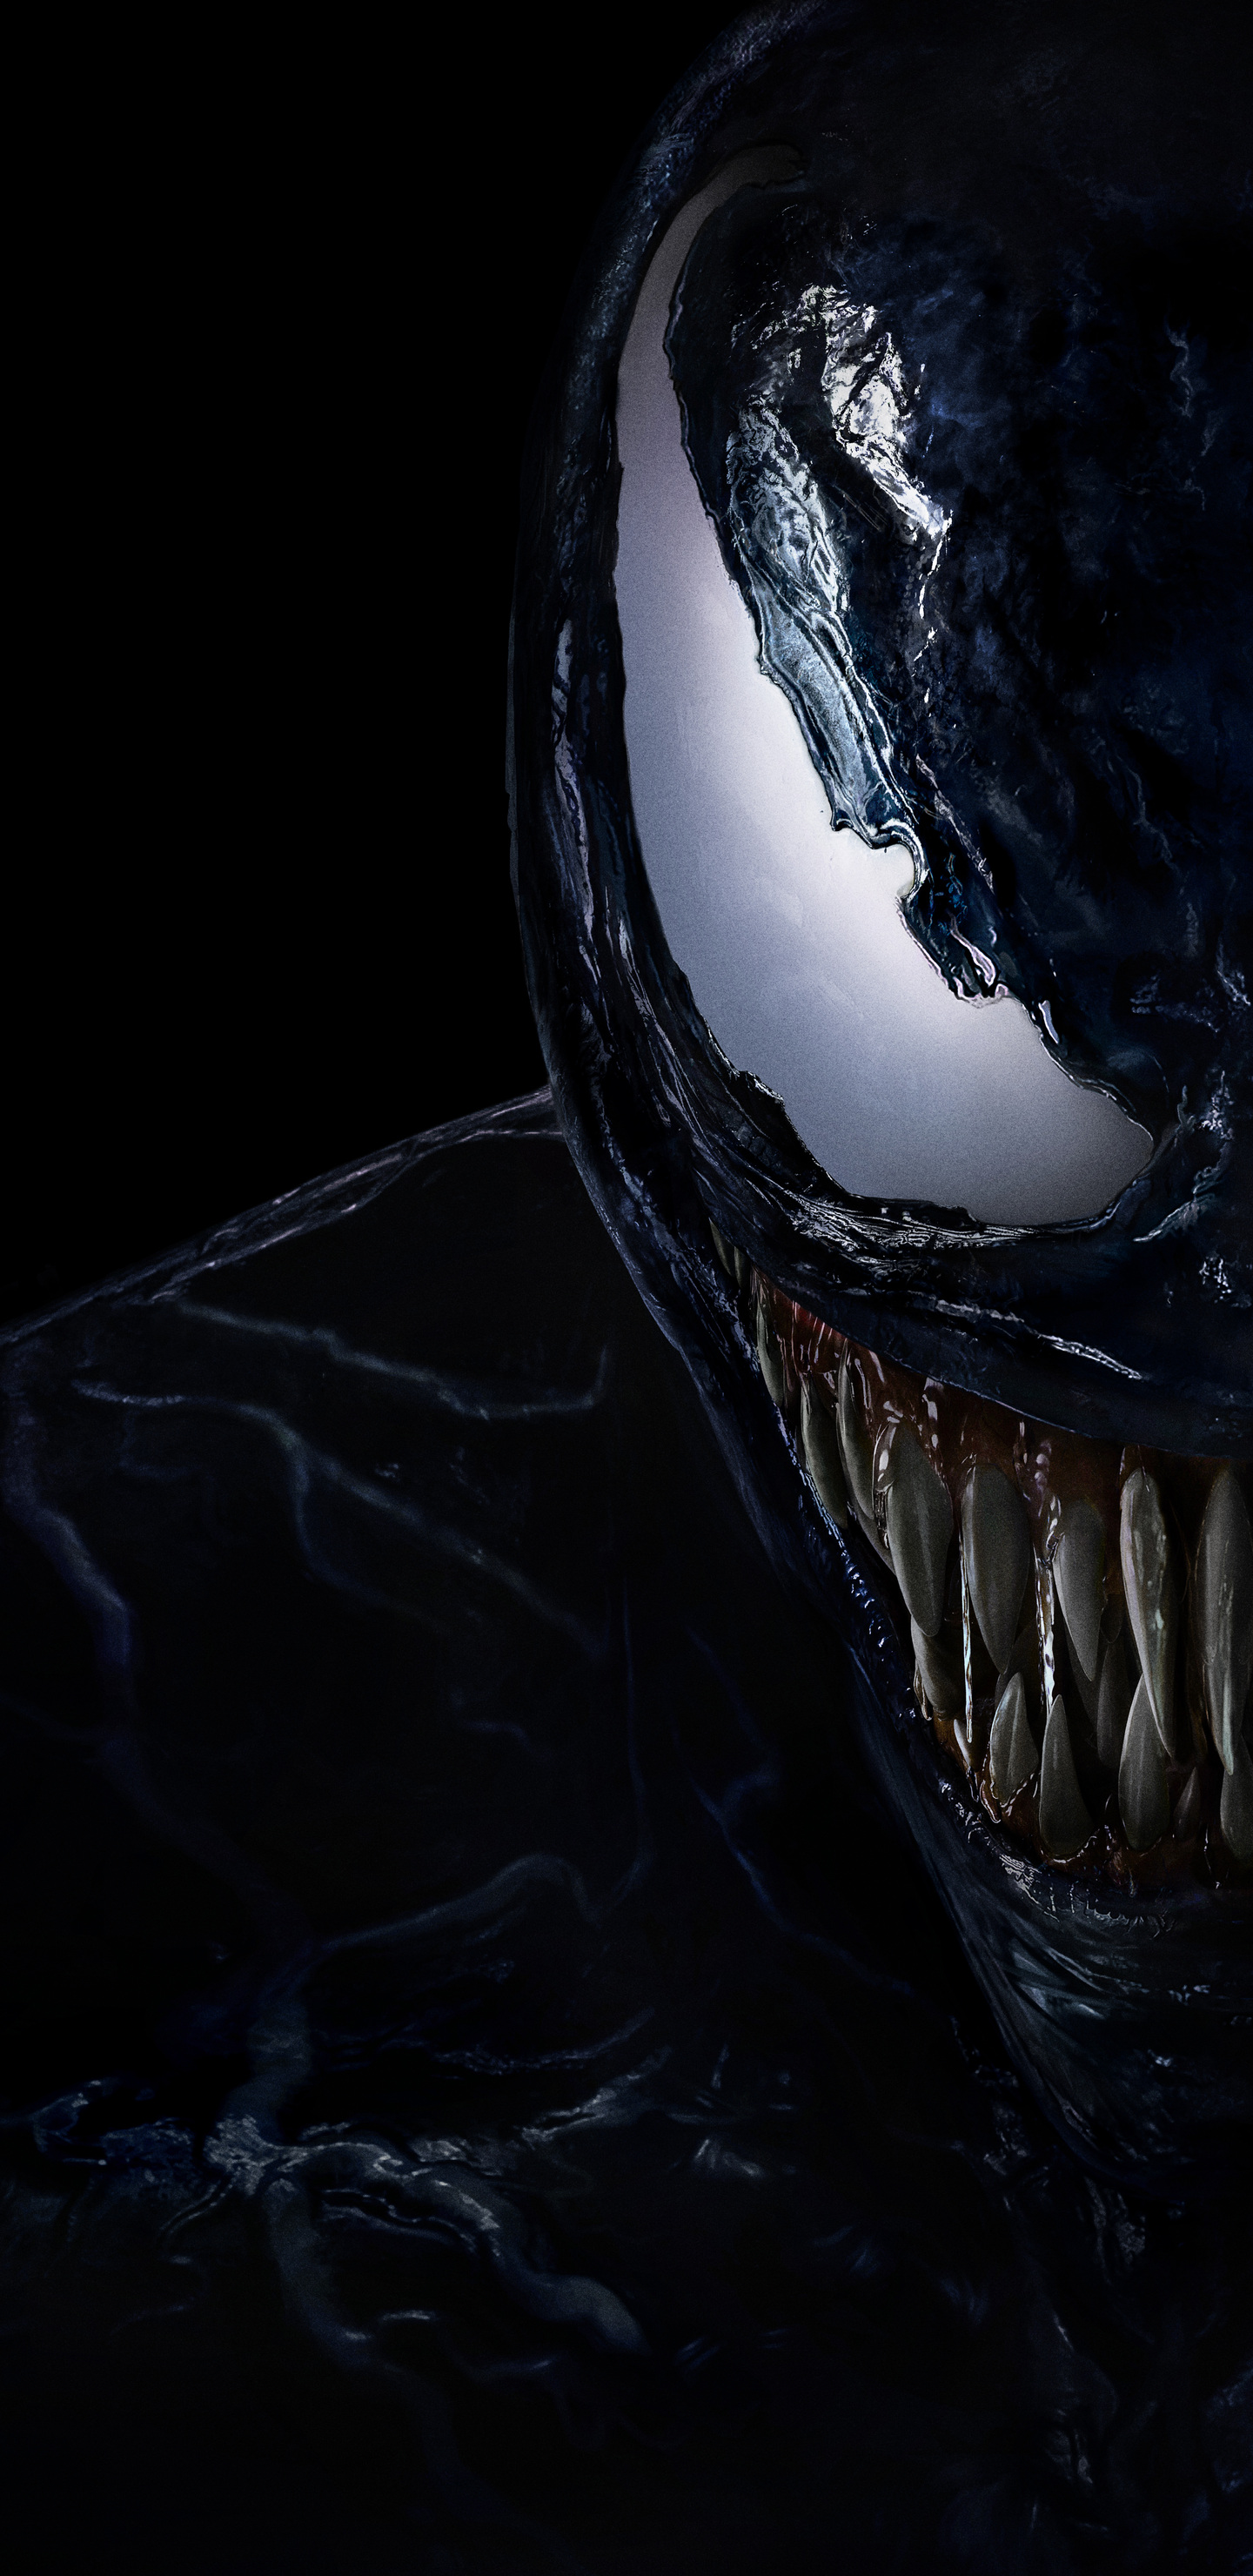 1440x2960 Venom Movie Official Poster 8k Samsung Galaxy Note 9,8, S9,S8,S8+  QHD HD 4k Wallpapers, Images, Backgrounds, Photos and Pictures